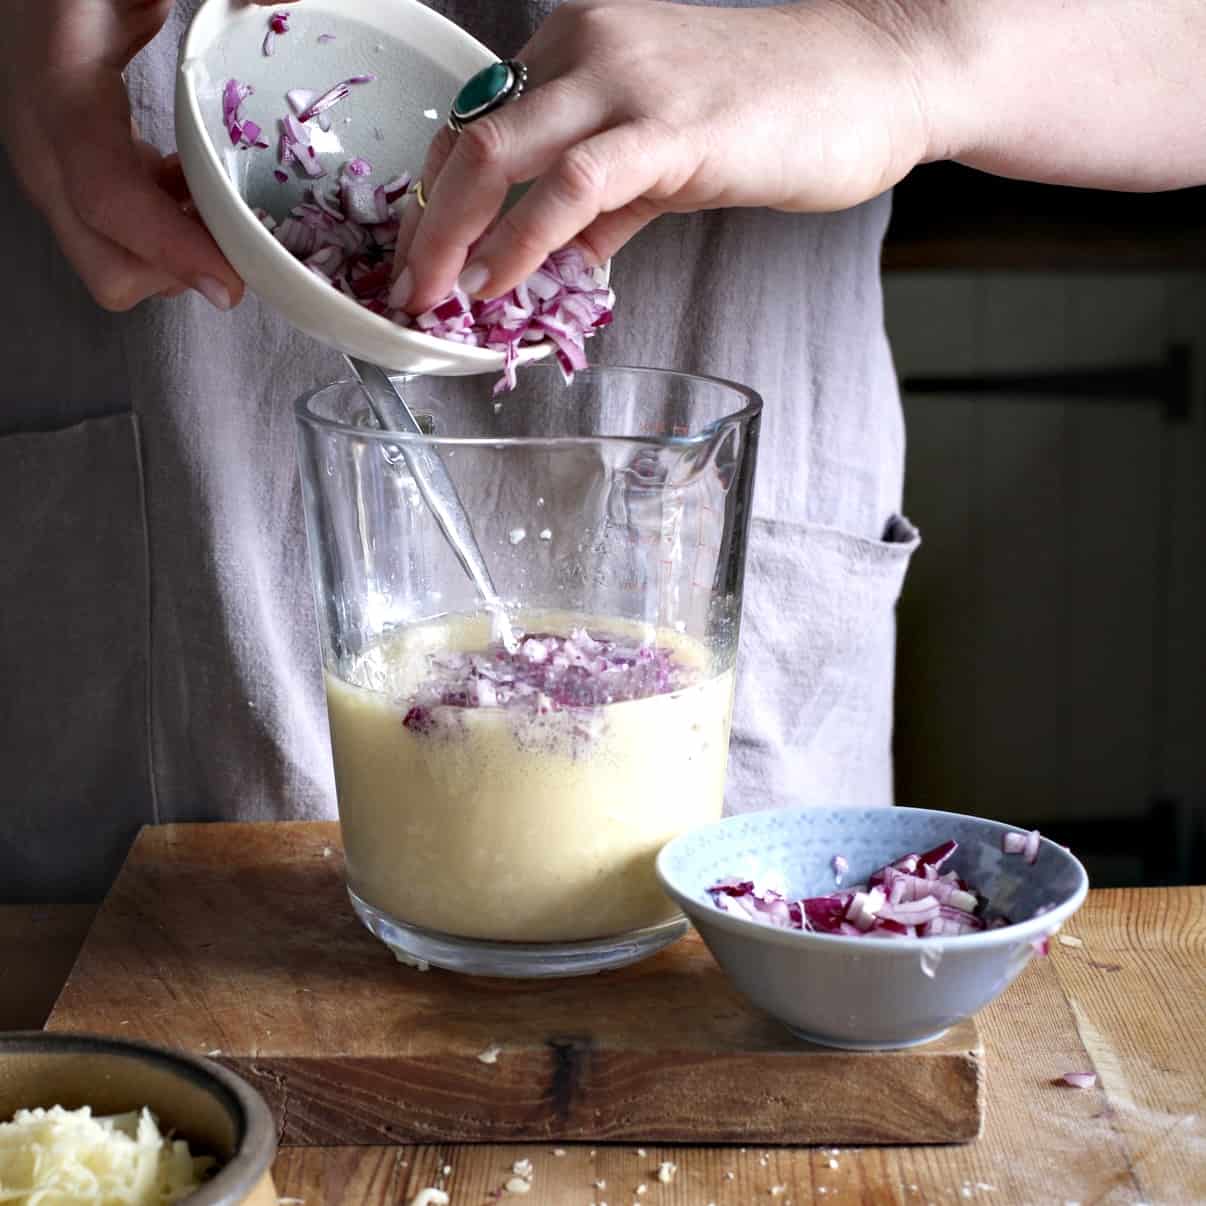 Woman in grey tipping chopped red onion from a small grey bowl into a glass jug of muffin batter